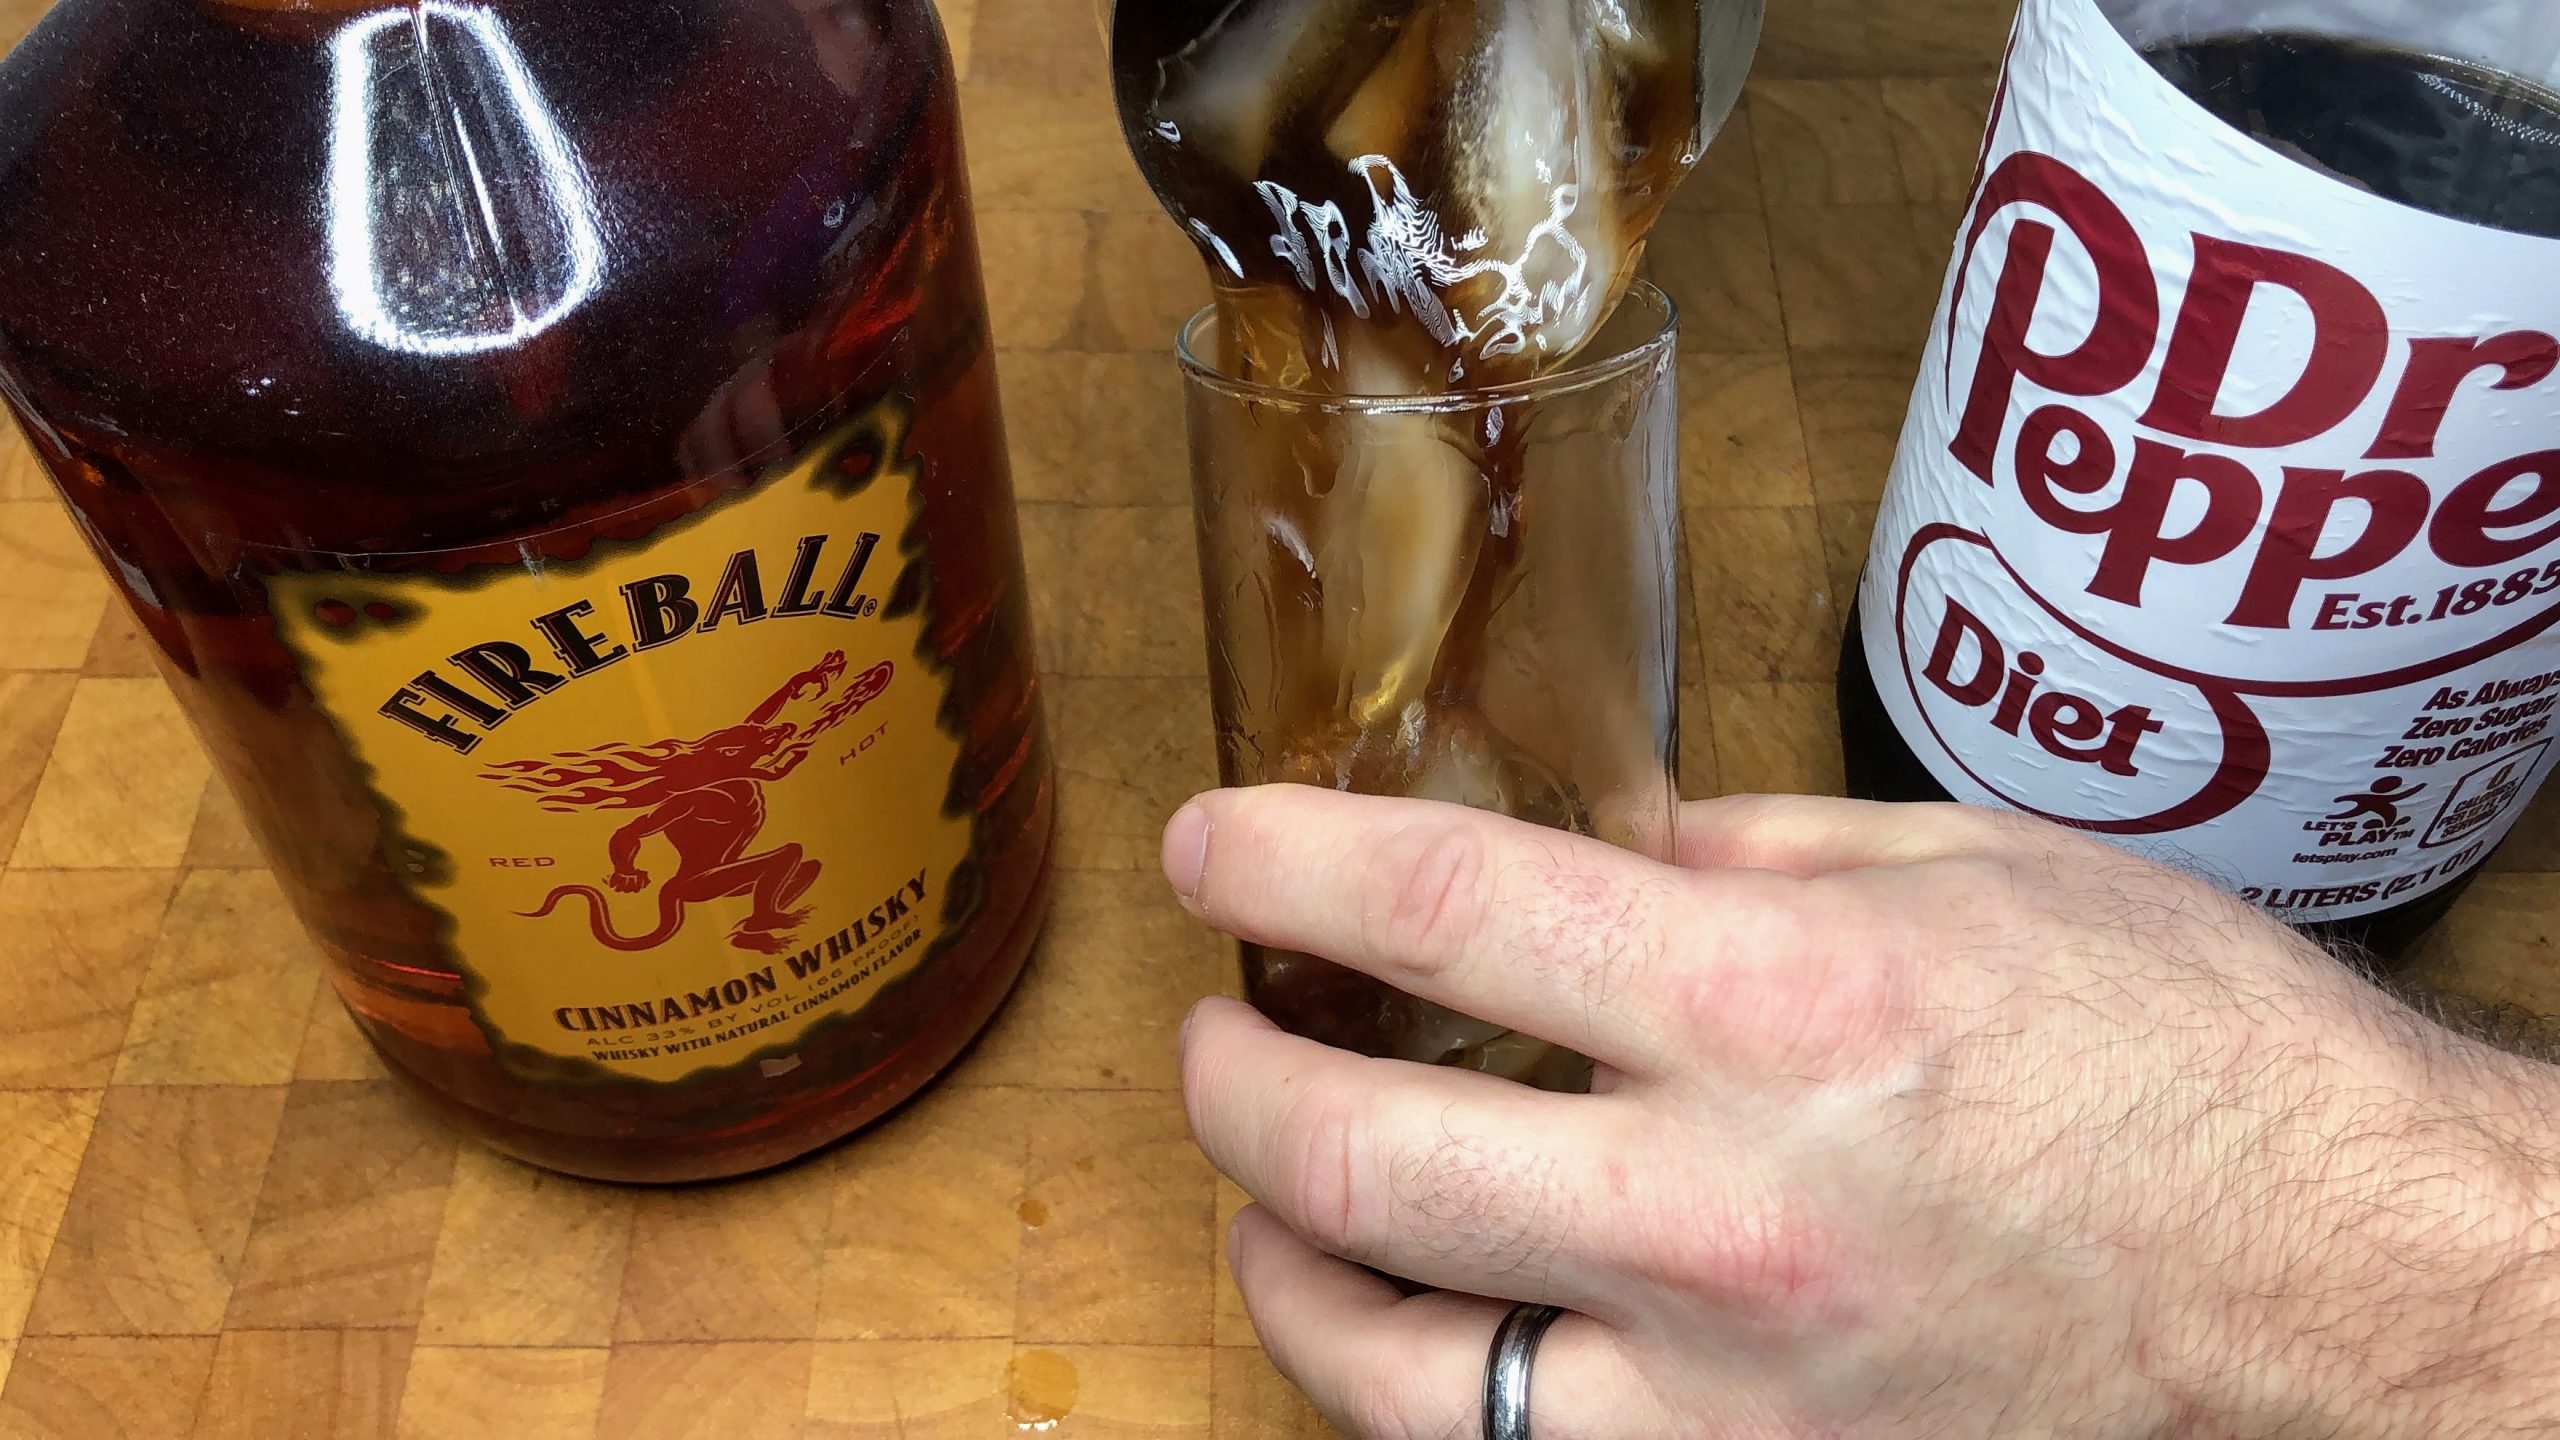 poiuring fireball and dr pepper from shaker into glass